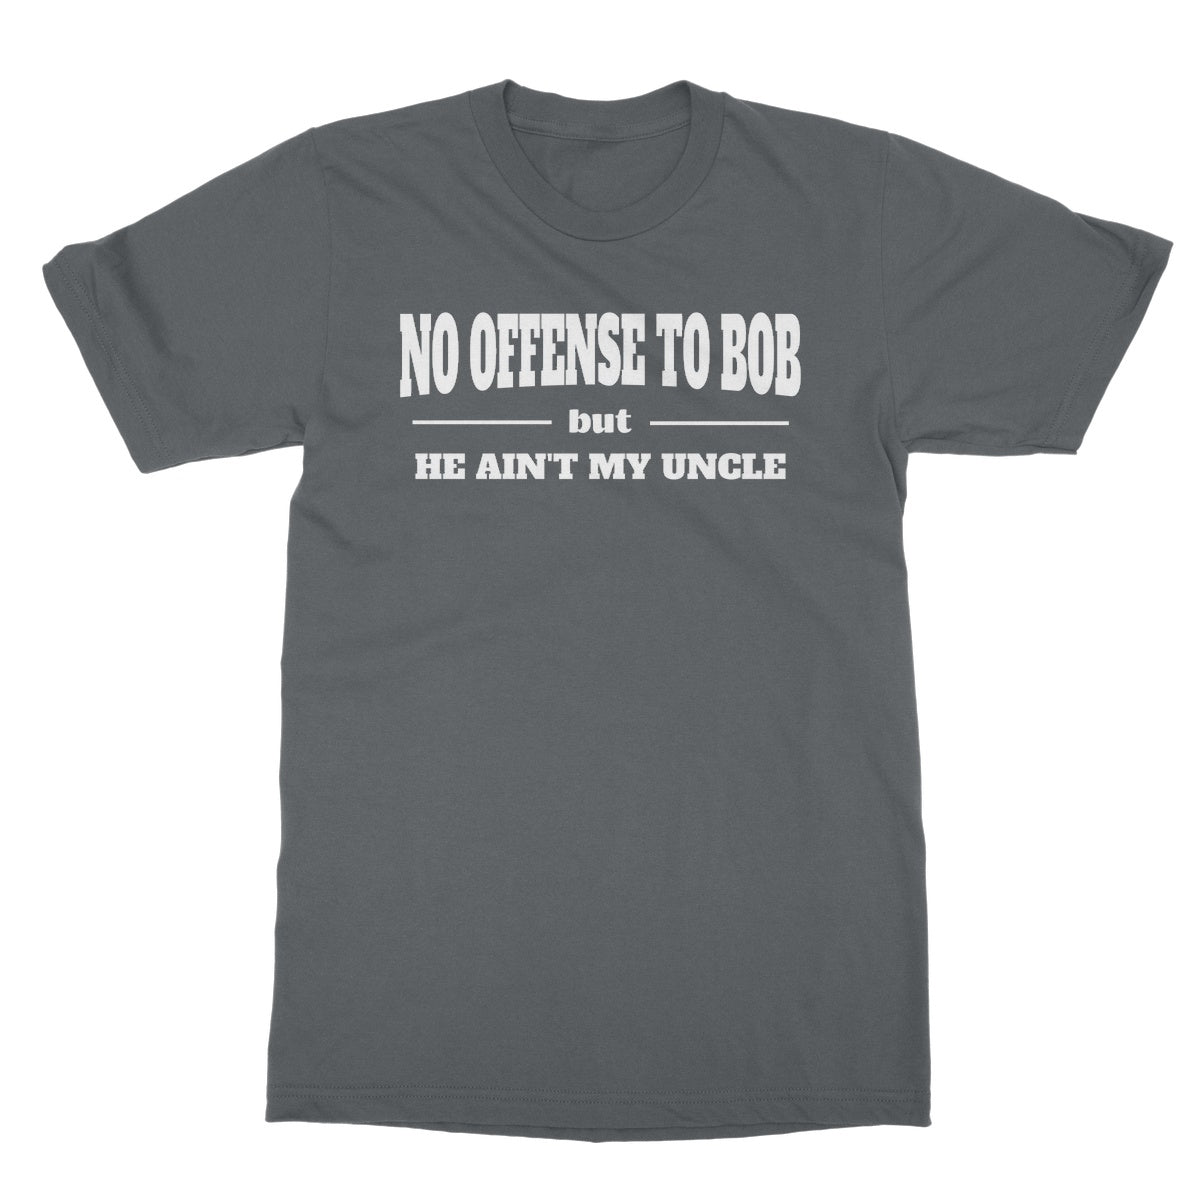 bob is not my uncle t shirt grey